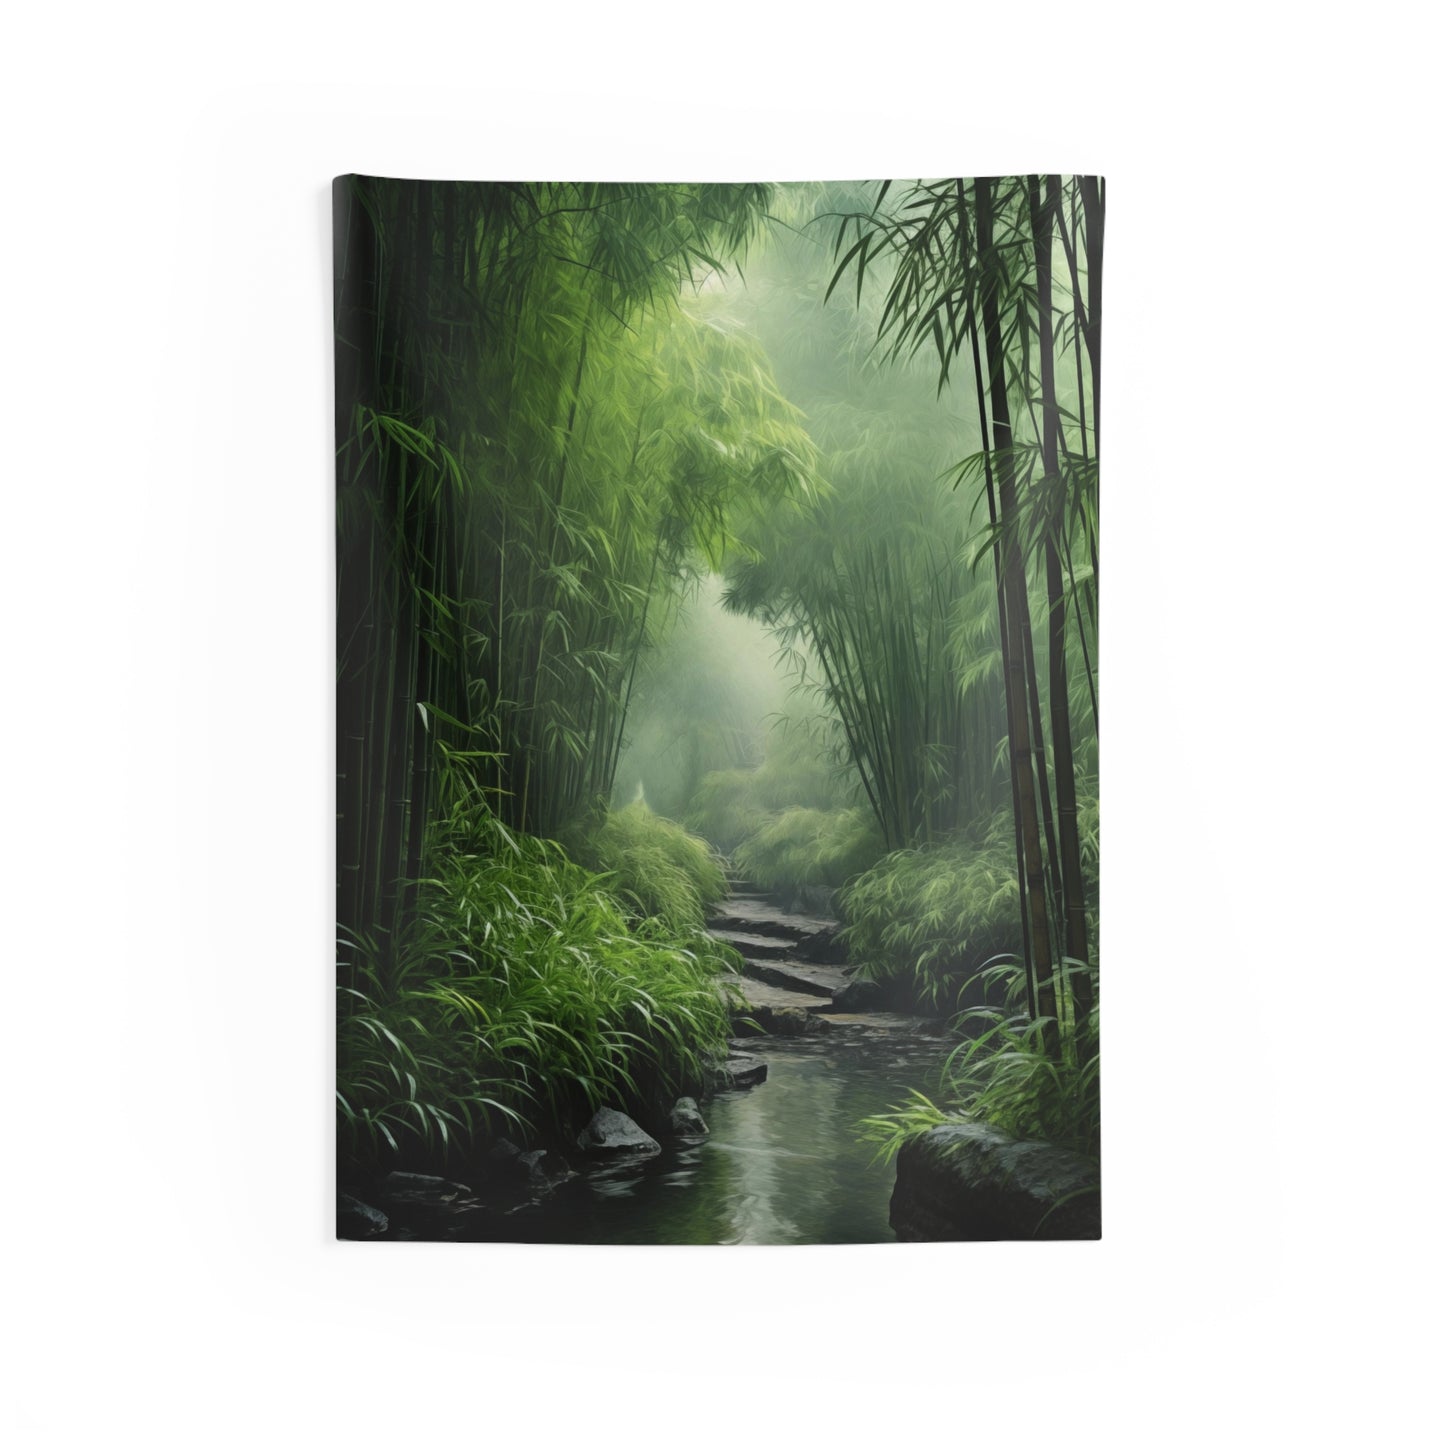 Bamboo Forest Tapestry, Green Nature Wall Art Hanging Cool Unique Vertical Aesthetic Large Small Decor Bedroom College Dorm Room